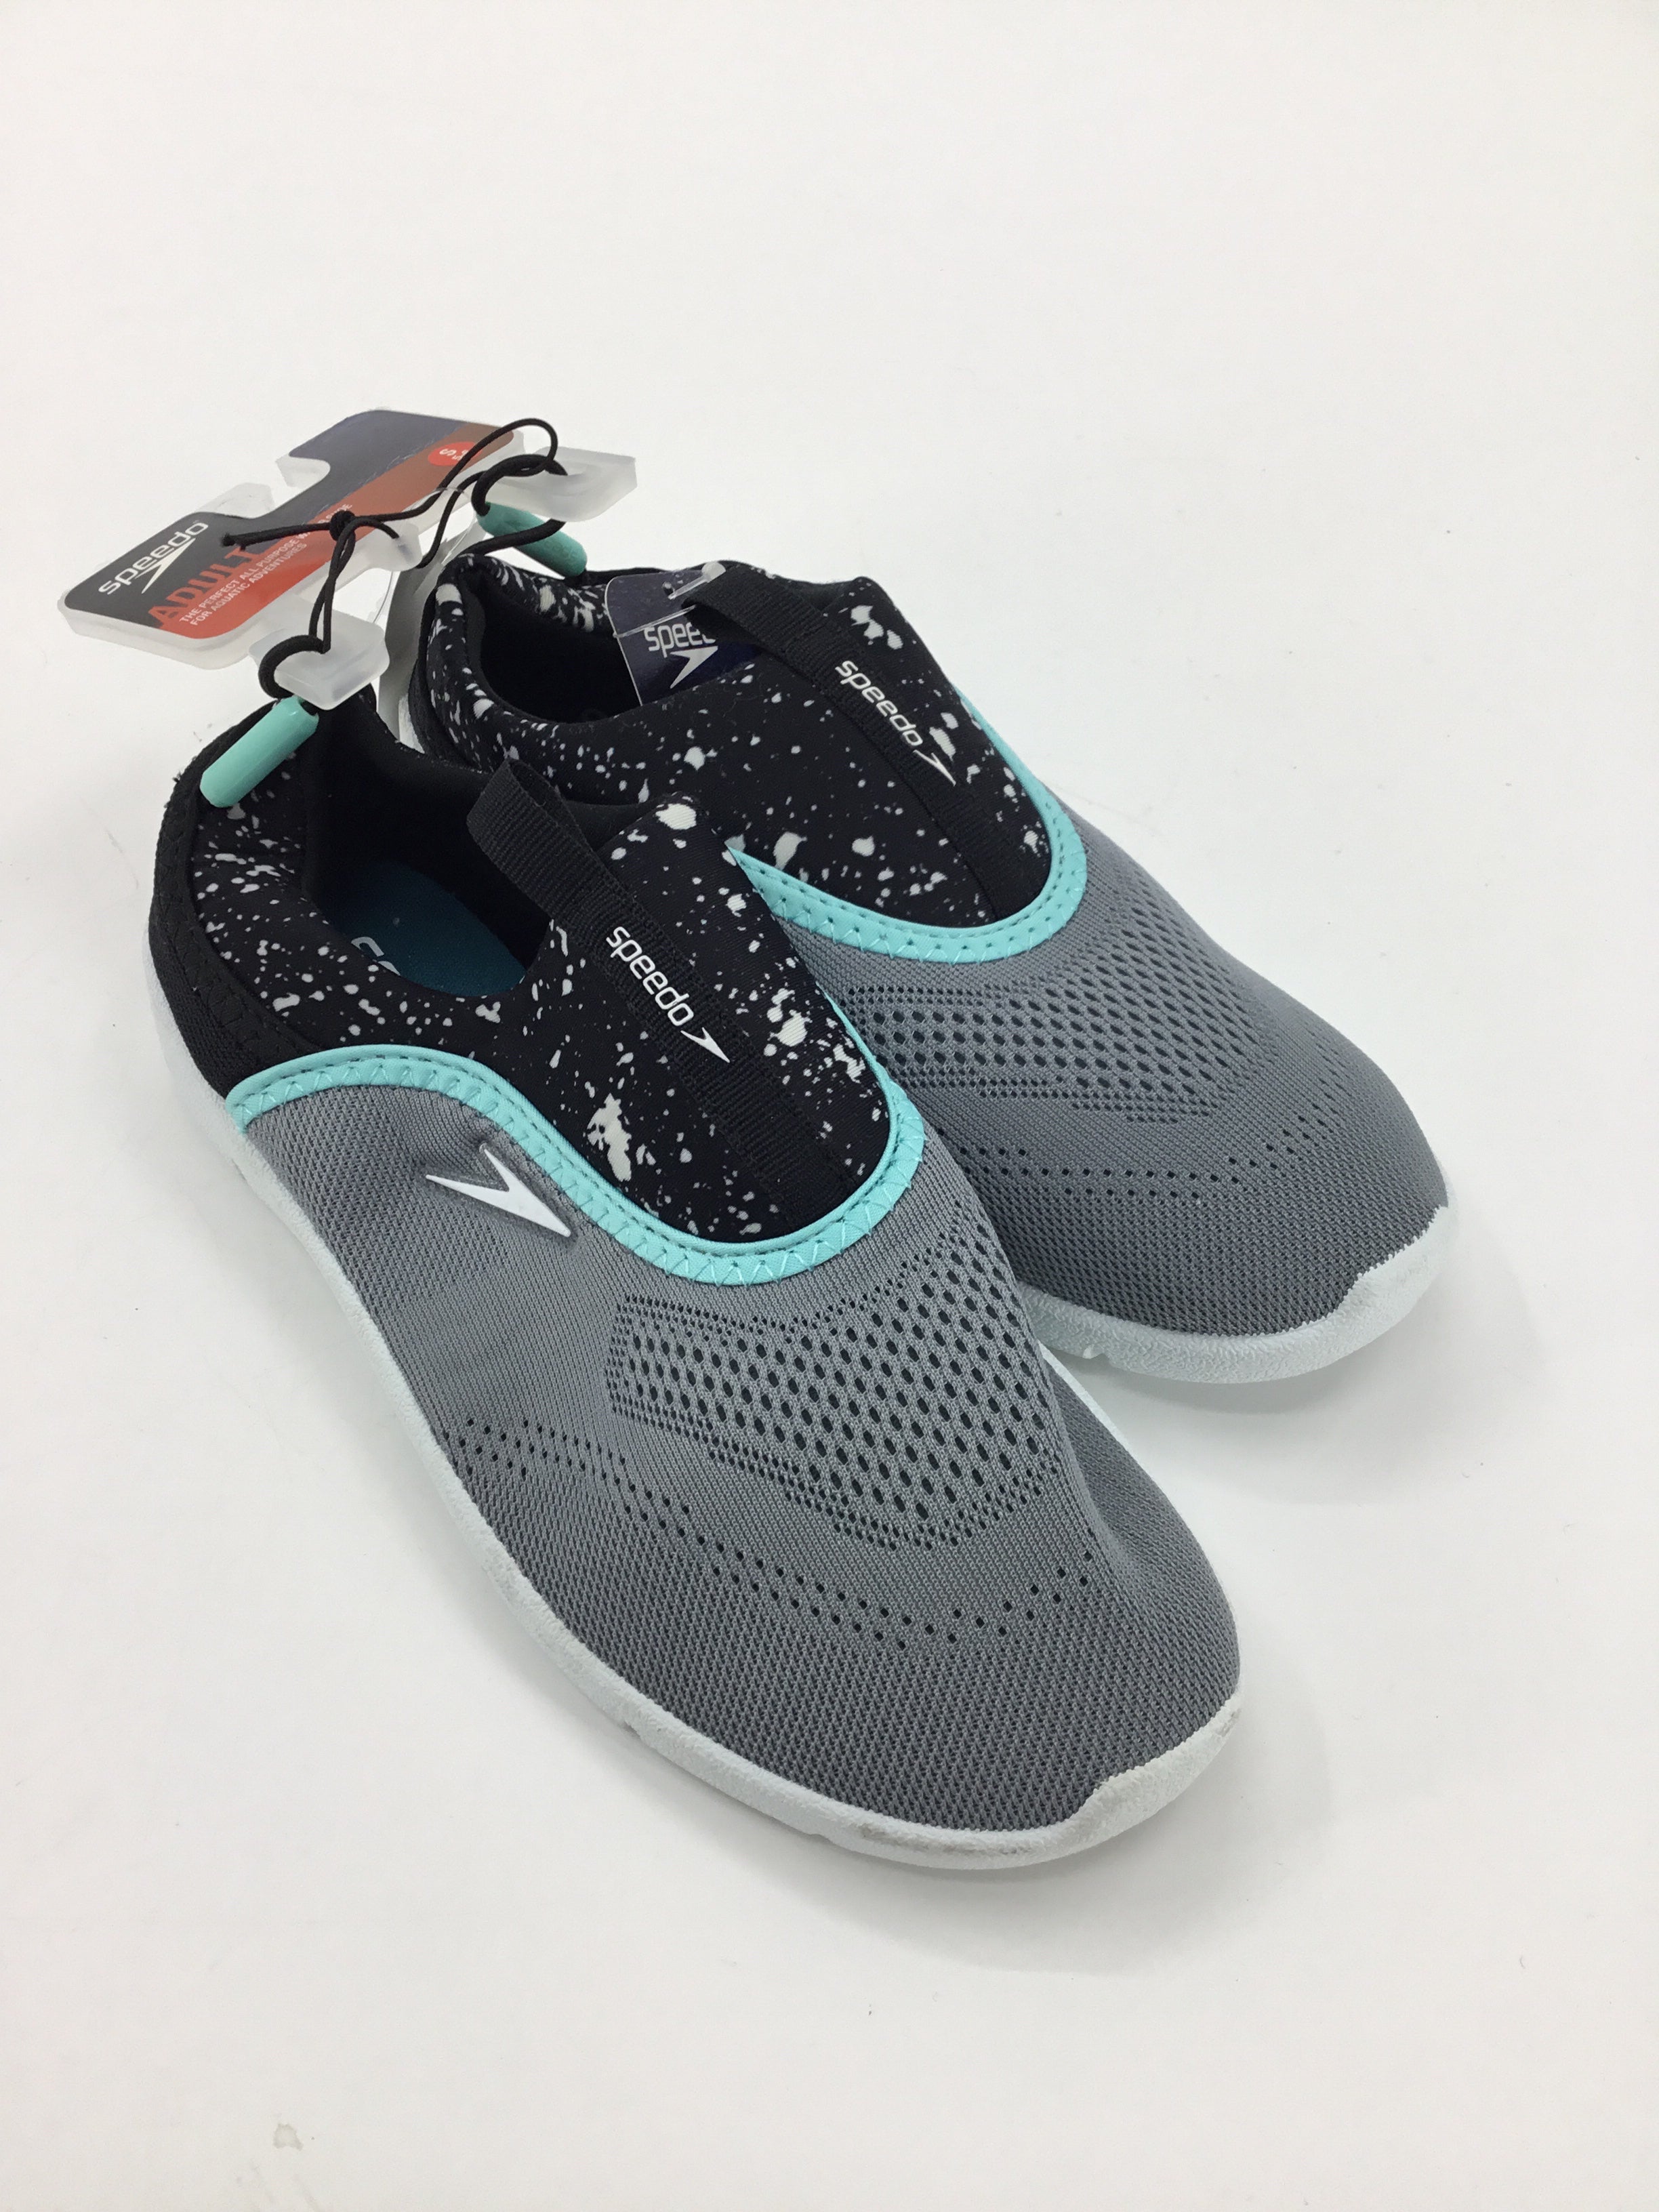 Speedo Child Size 5 Youth Gray Water Shoes